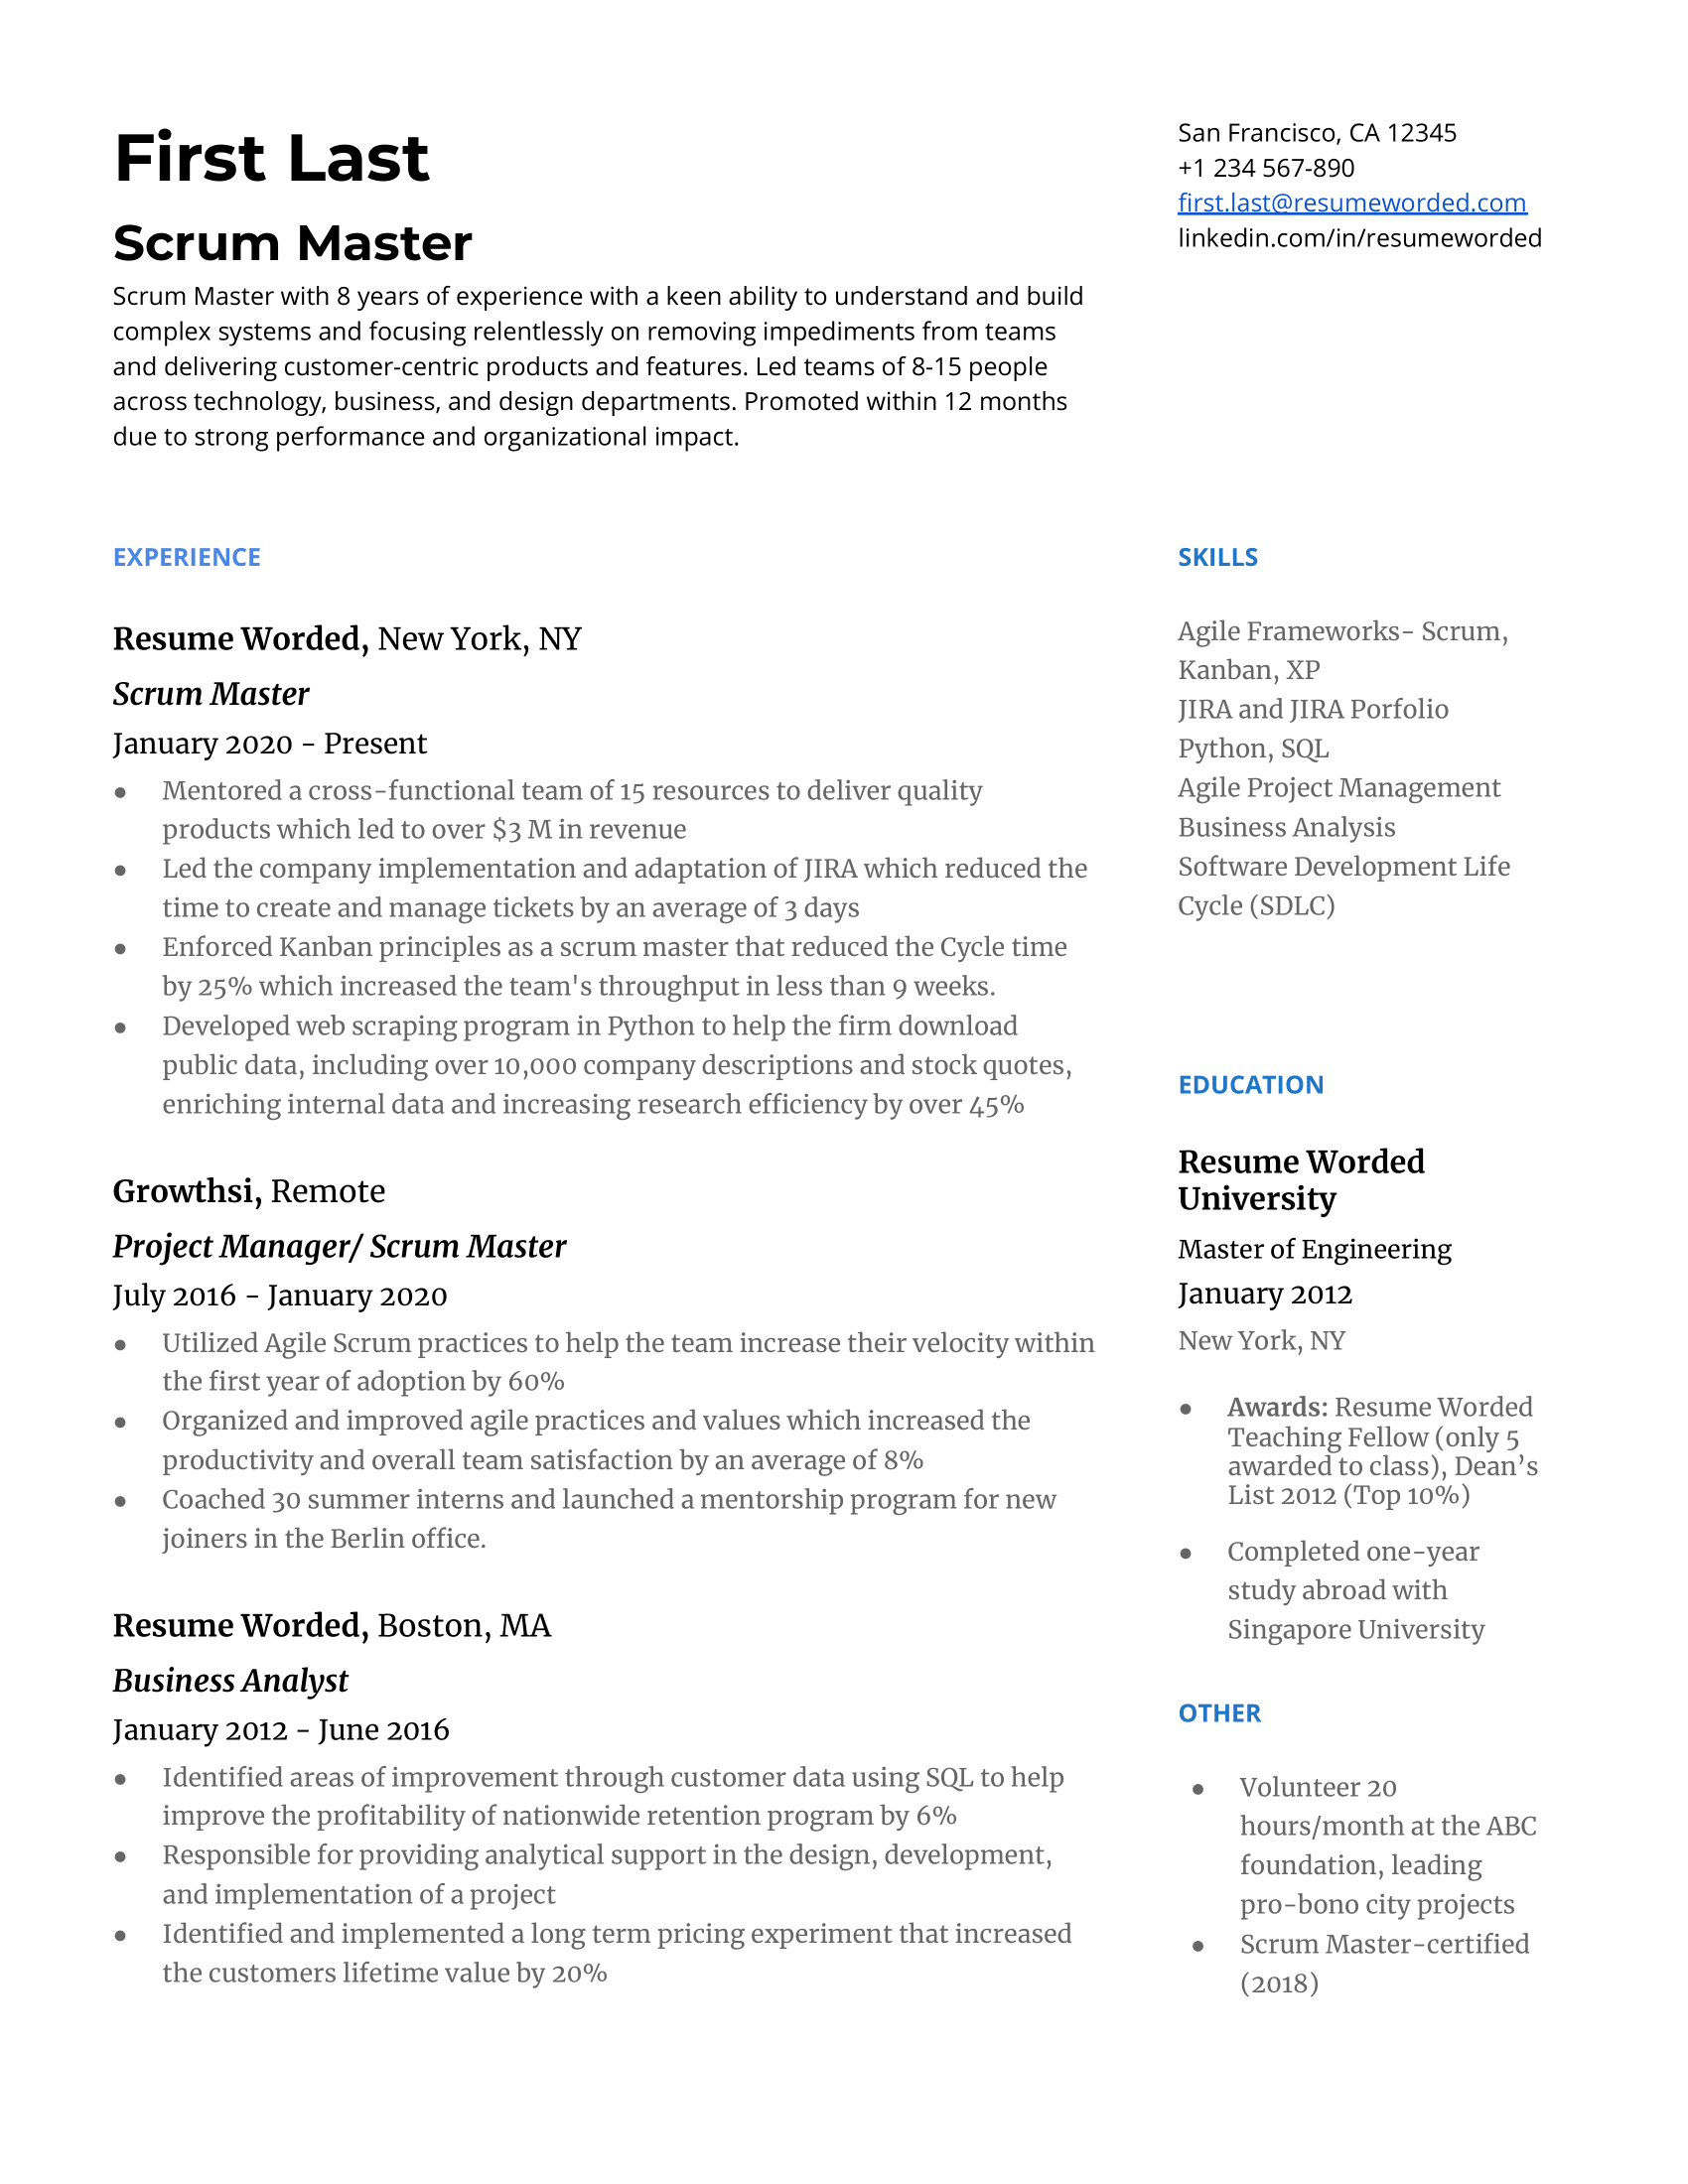 A scrum master resume template including contact info, skills, and education.